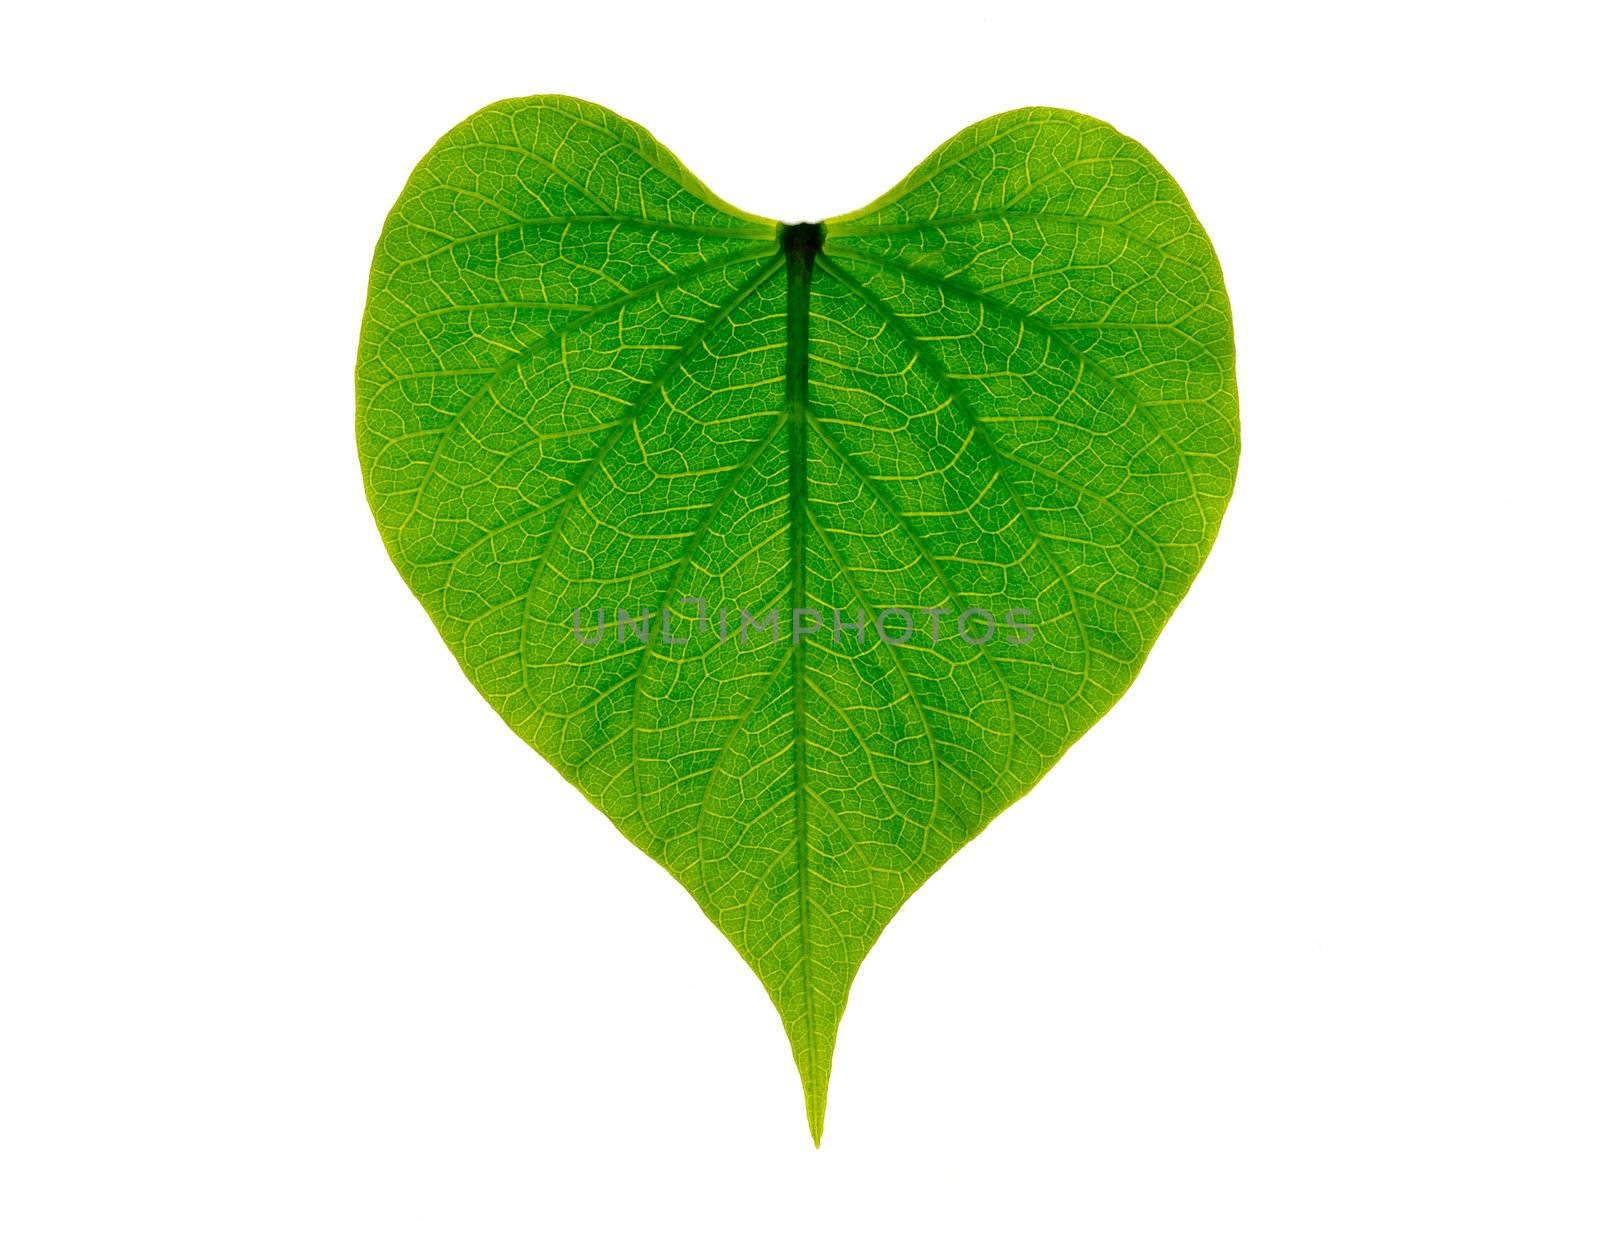 heart shaped green leaf, symbolizing love for the environment and a sustainable future